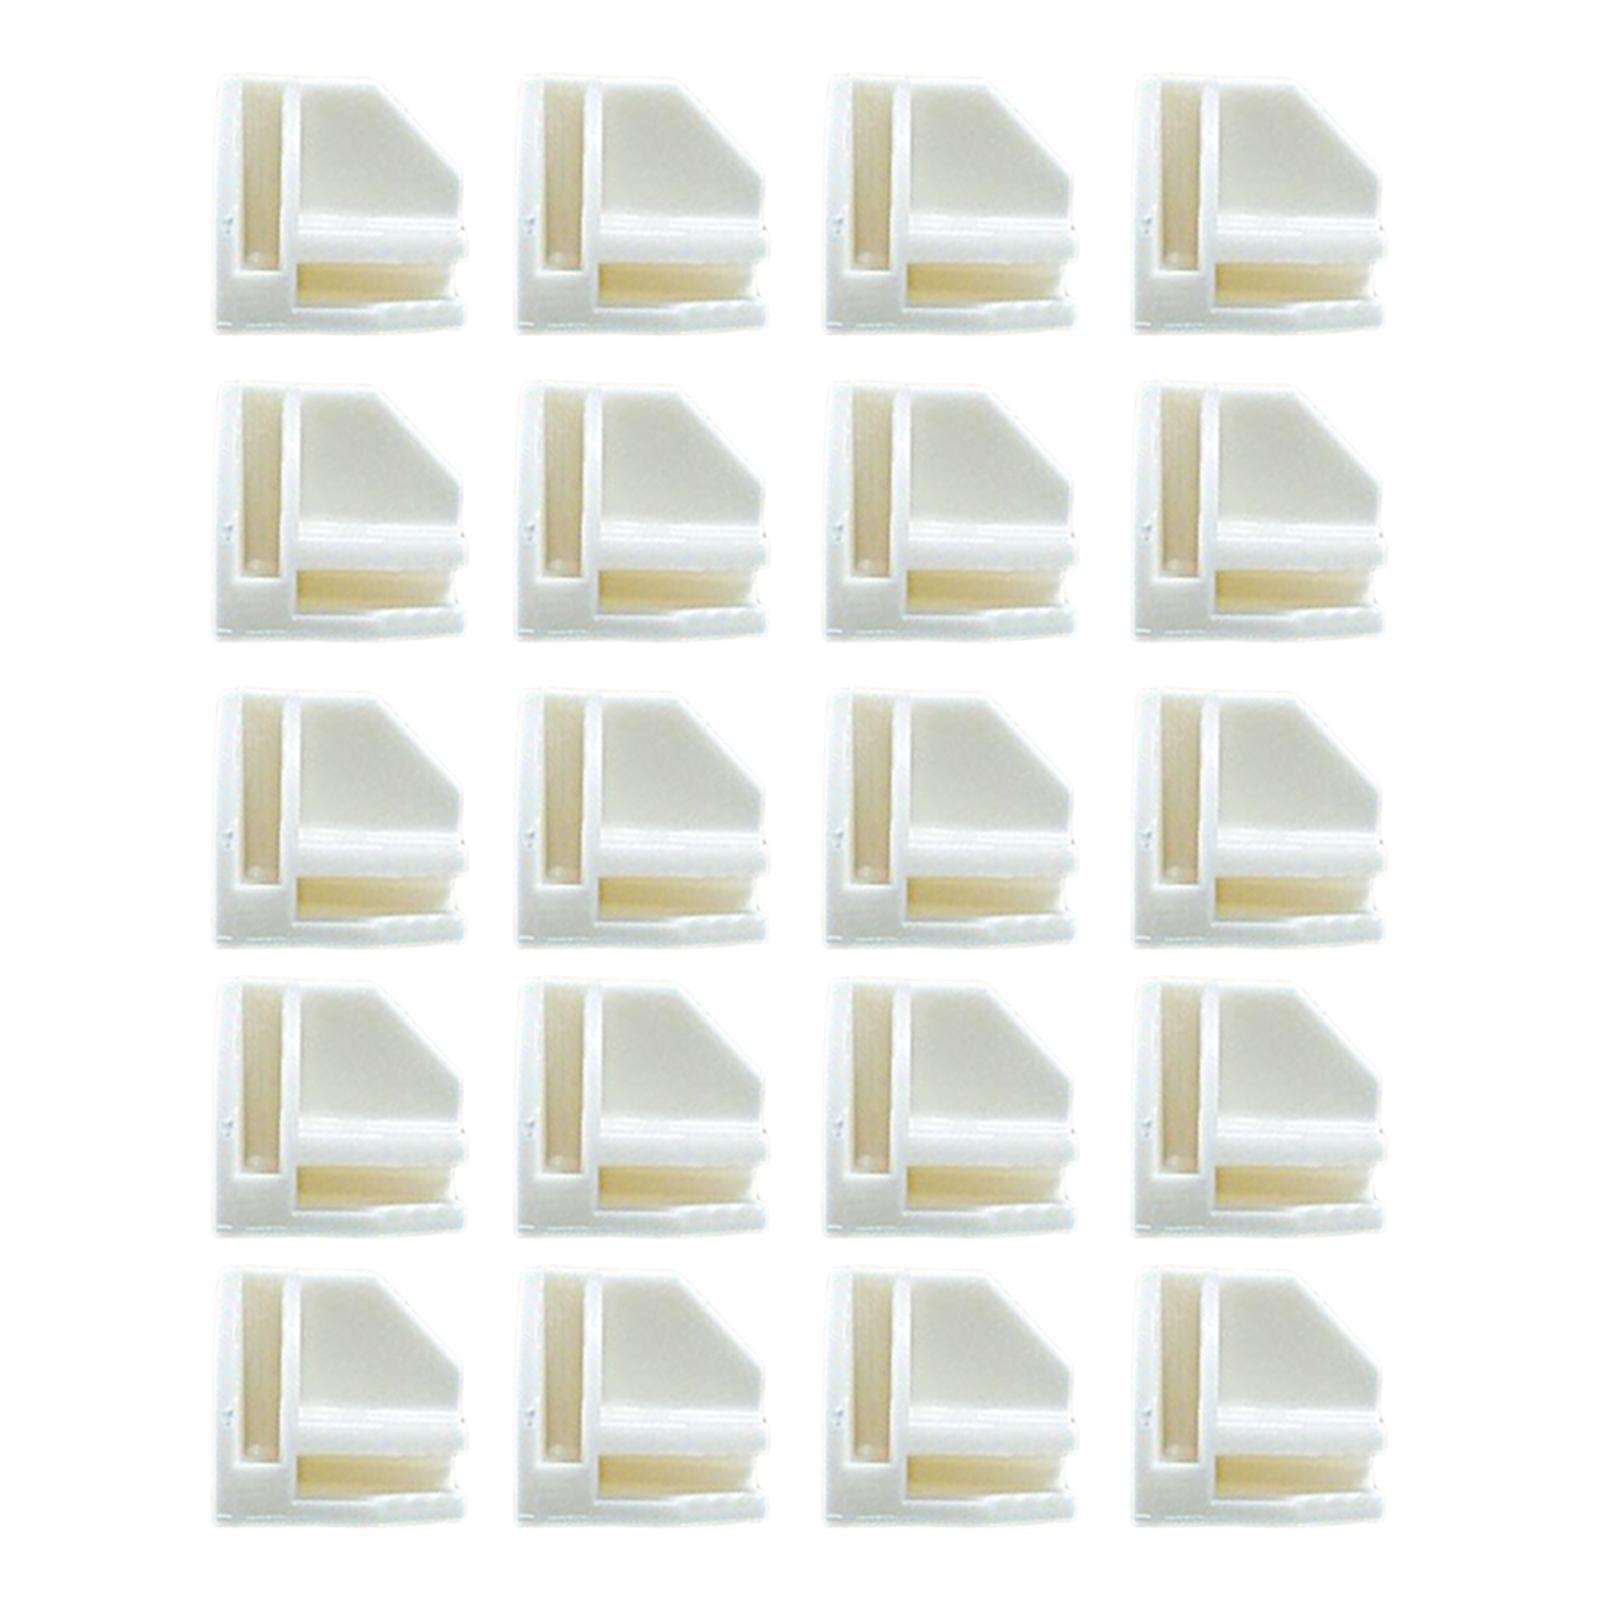 20x Wire Cube Connectors Repair Parts Grid Connectors Grid for Modular Organizer White Round